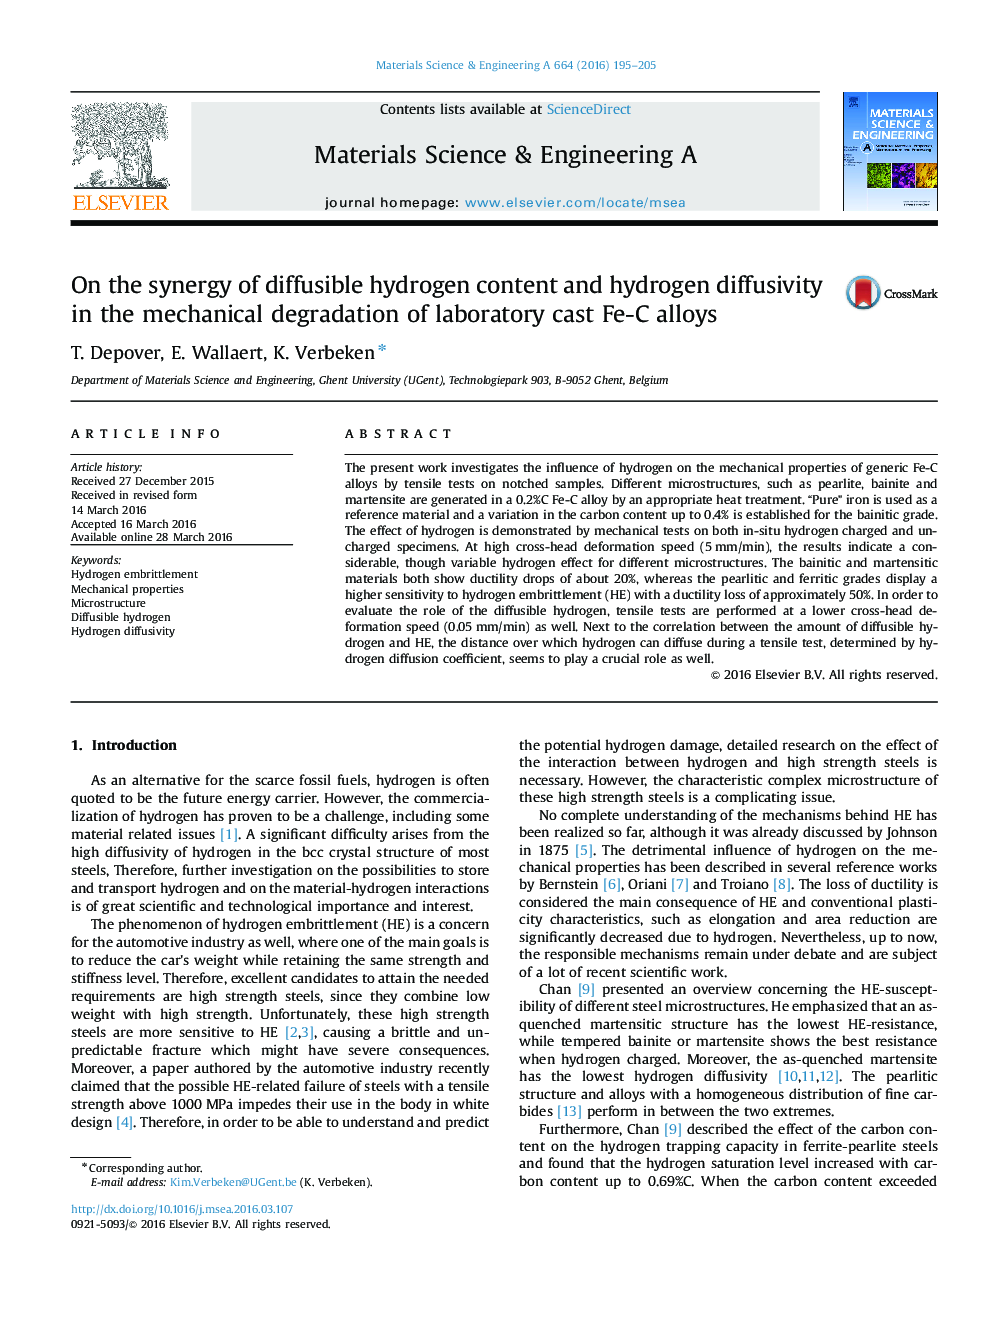 On the synergy of diffusible hydrogen content and hydrogen diffusivity in the mechanical degradation of laboratory cast Fe-C alloys